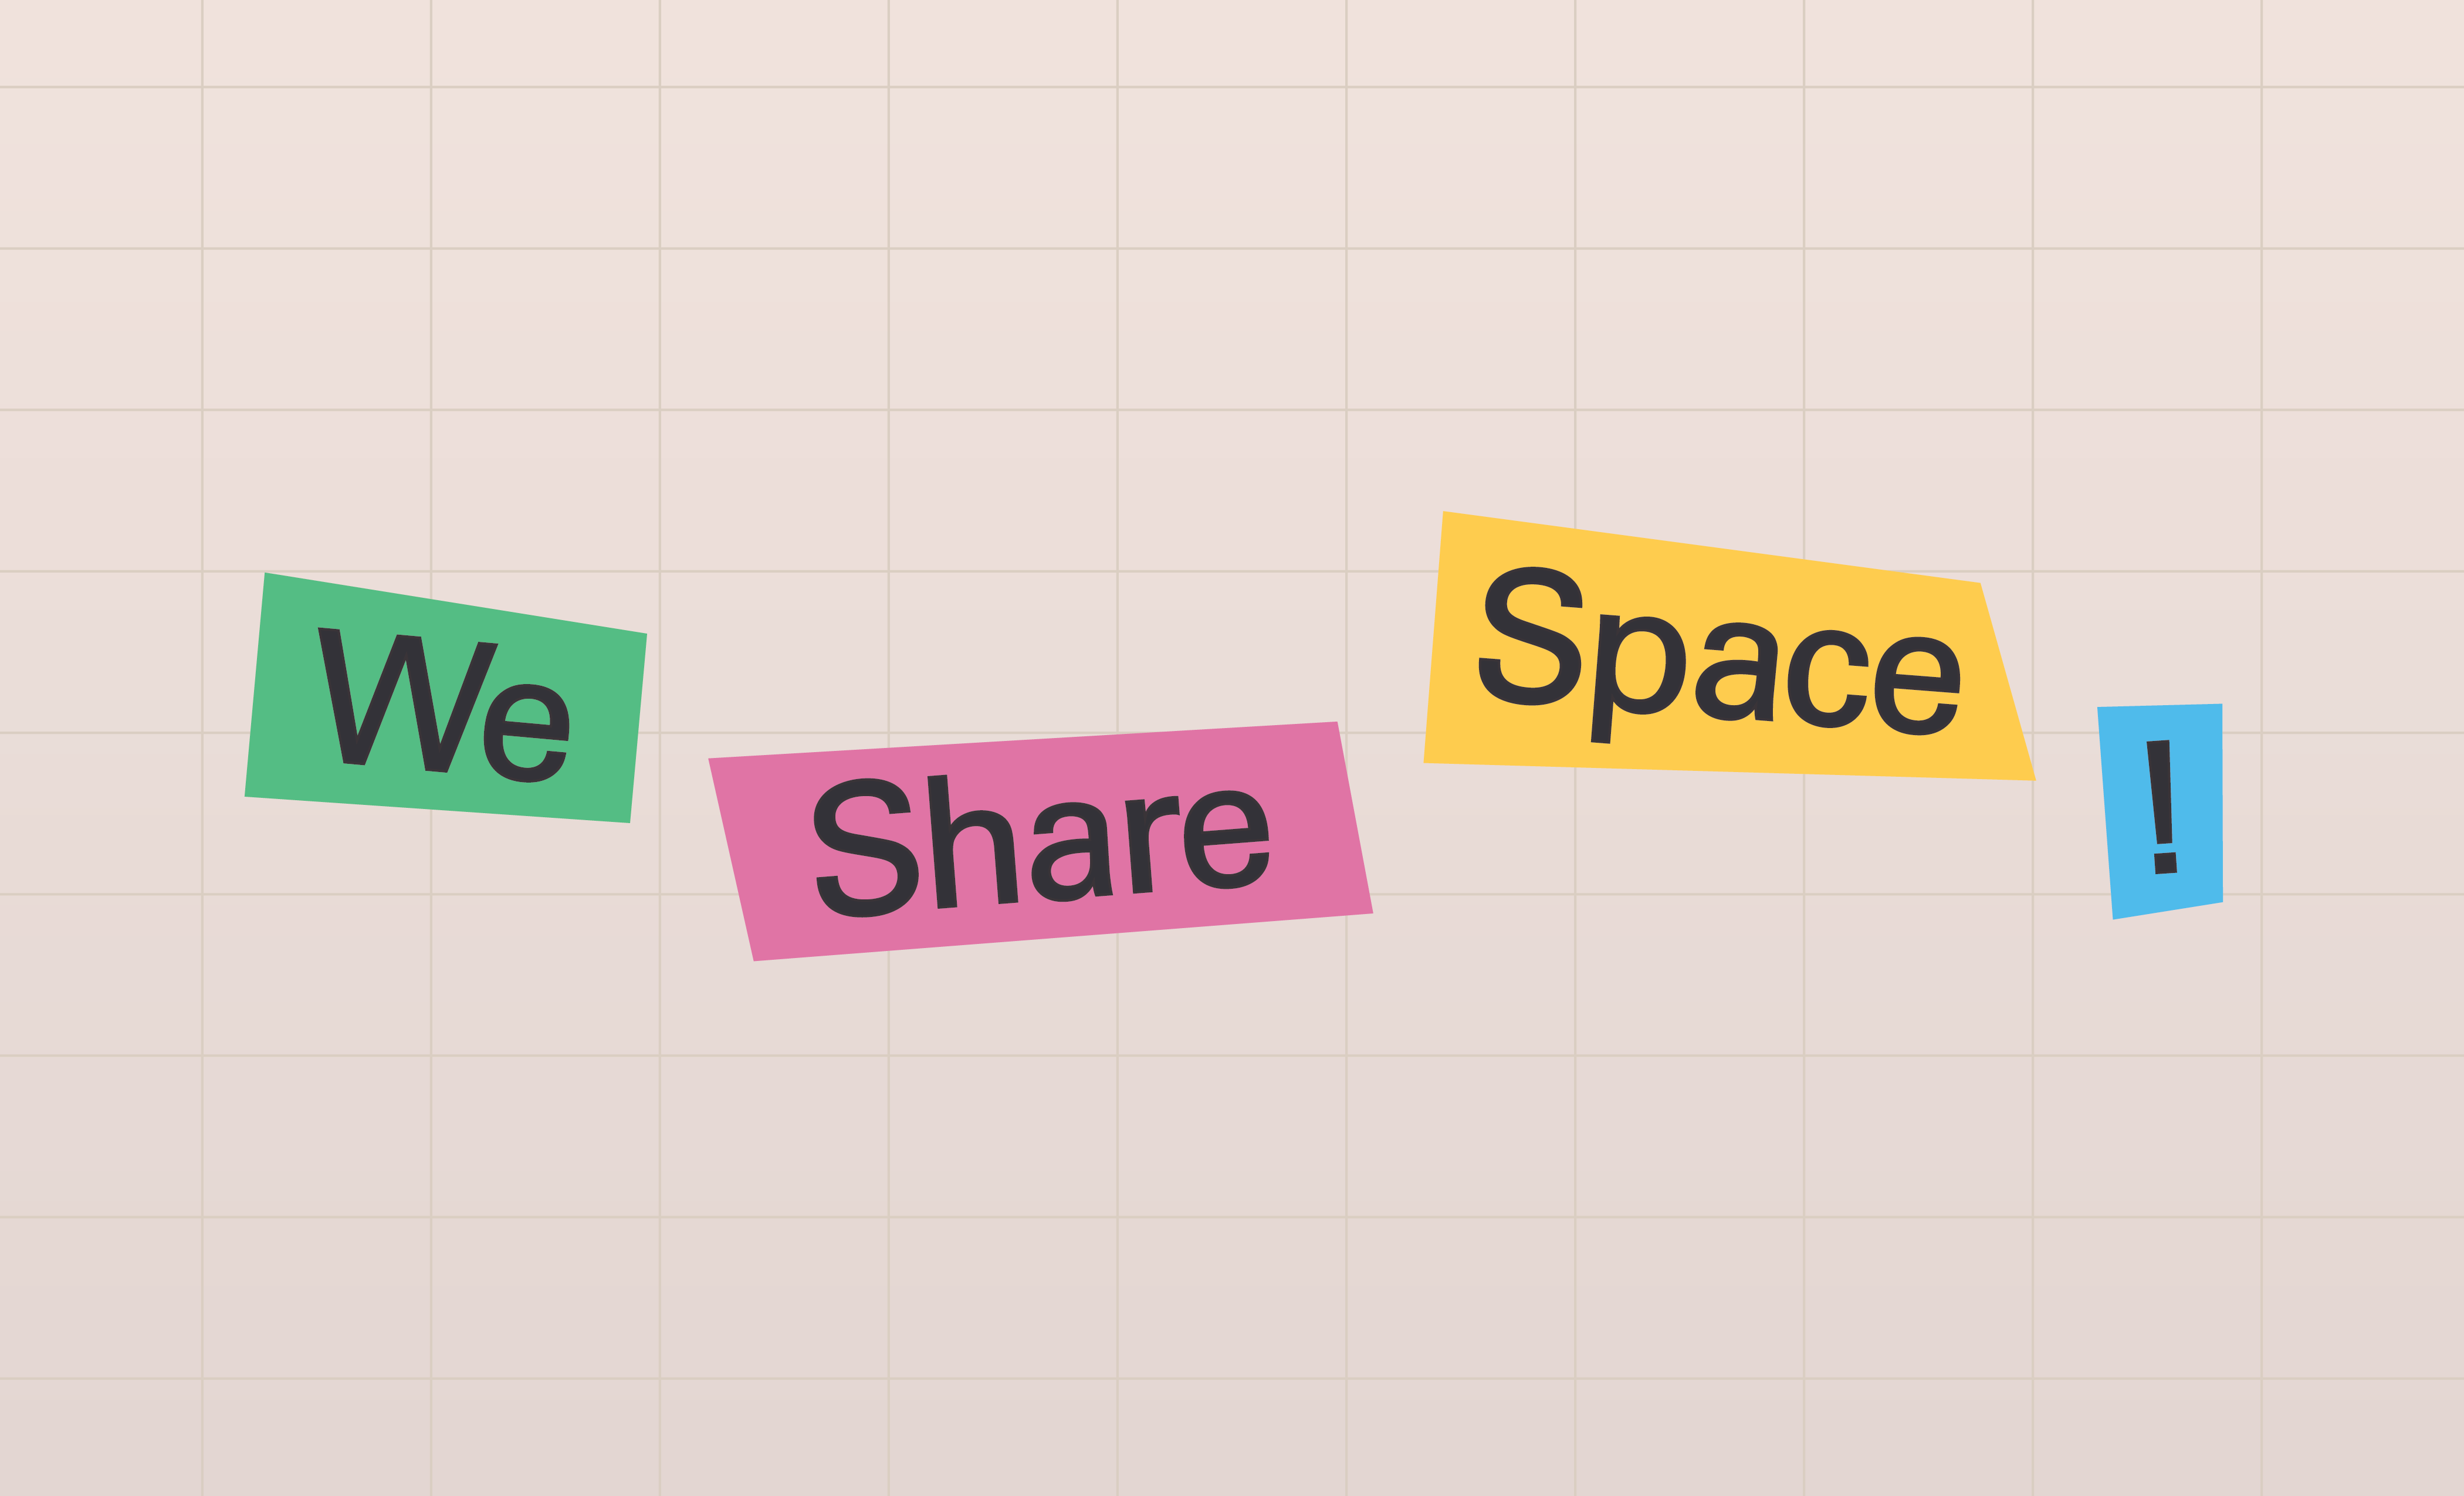 We Share Space